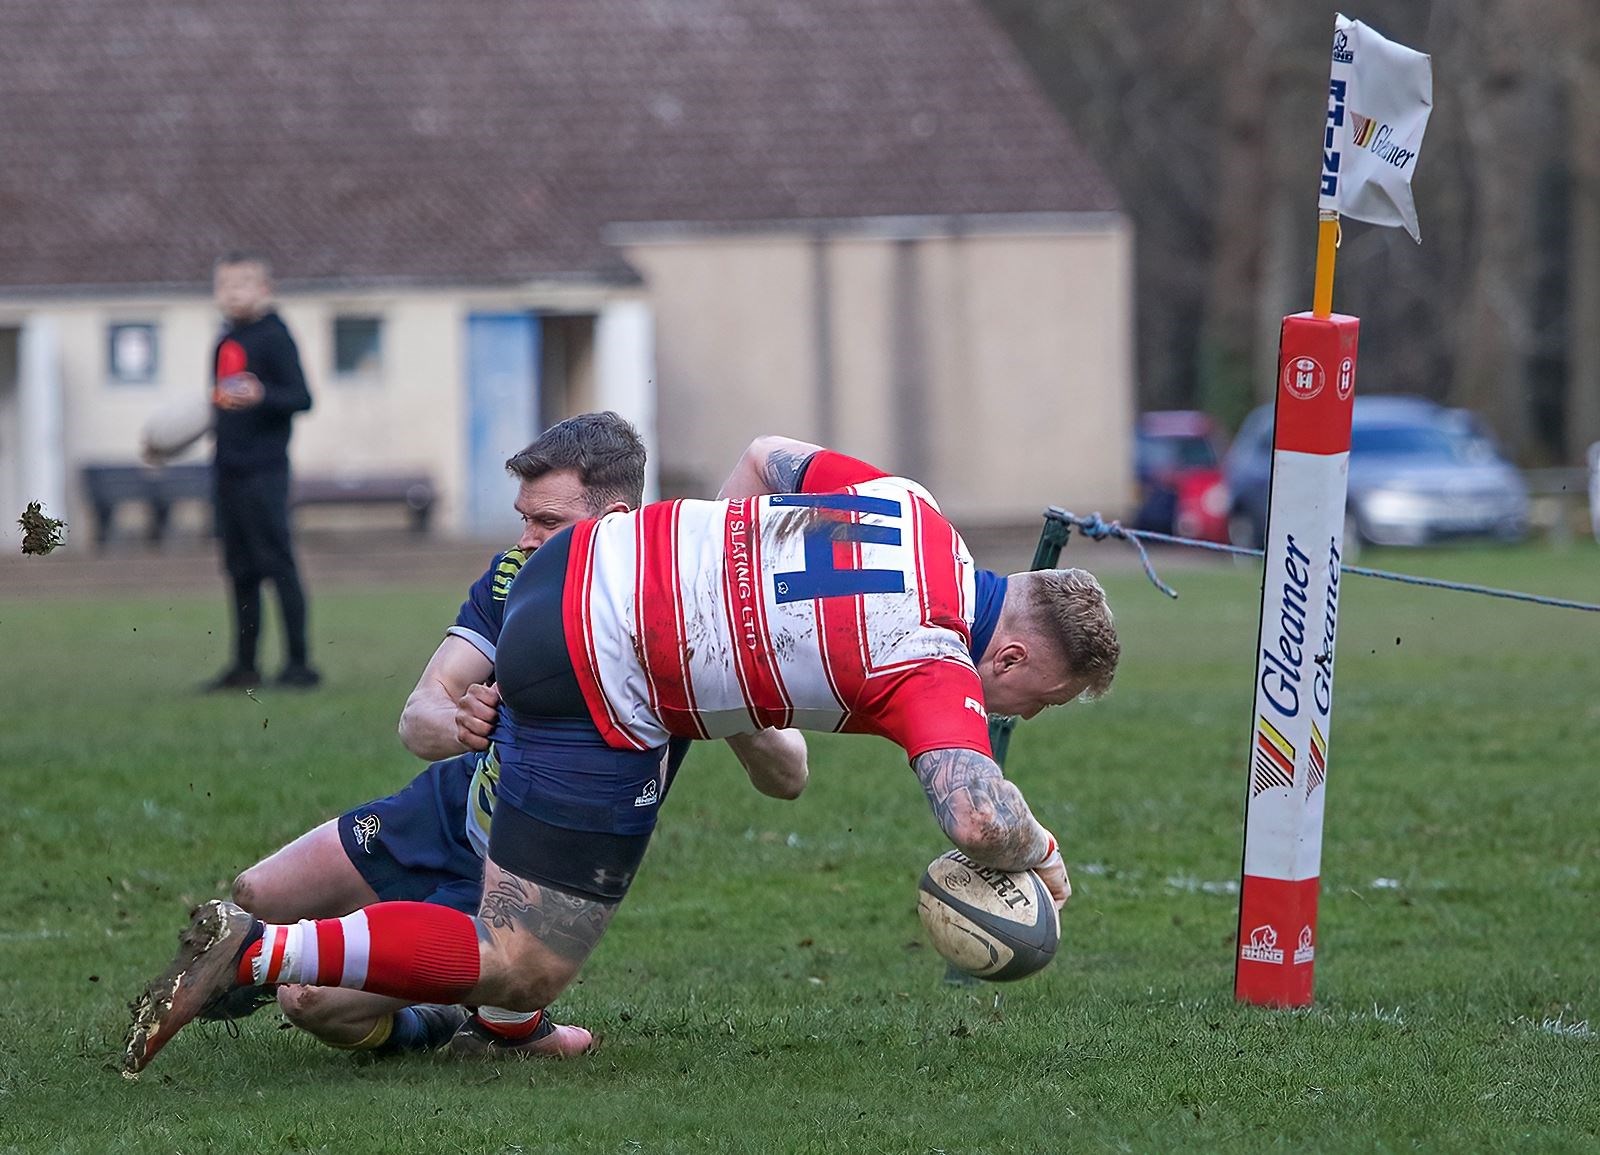 Crossing the opposition line and touching down for a try has become a common occurance for Lewis Scott.